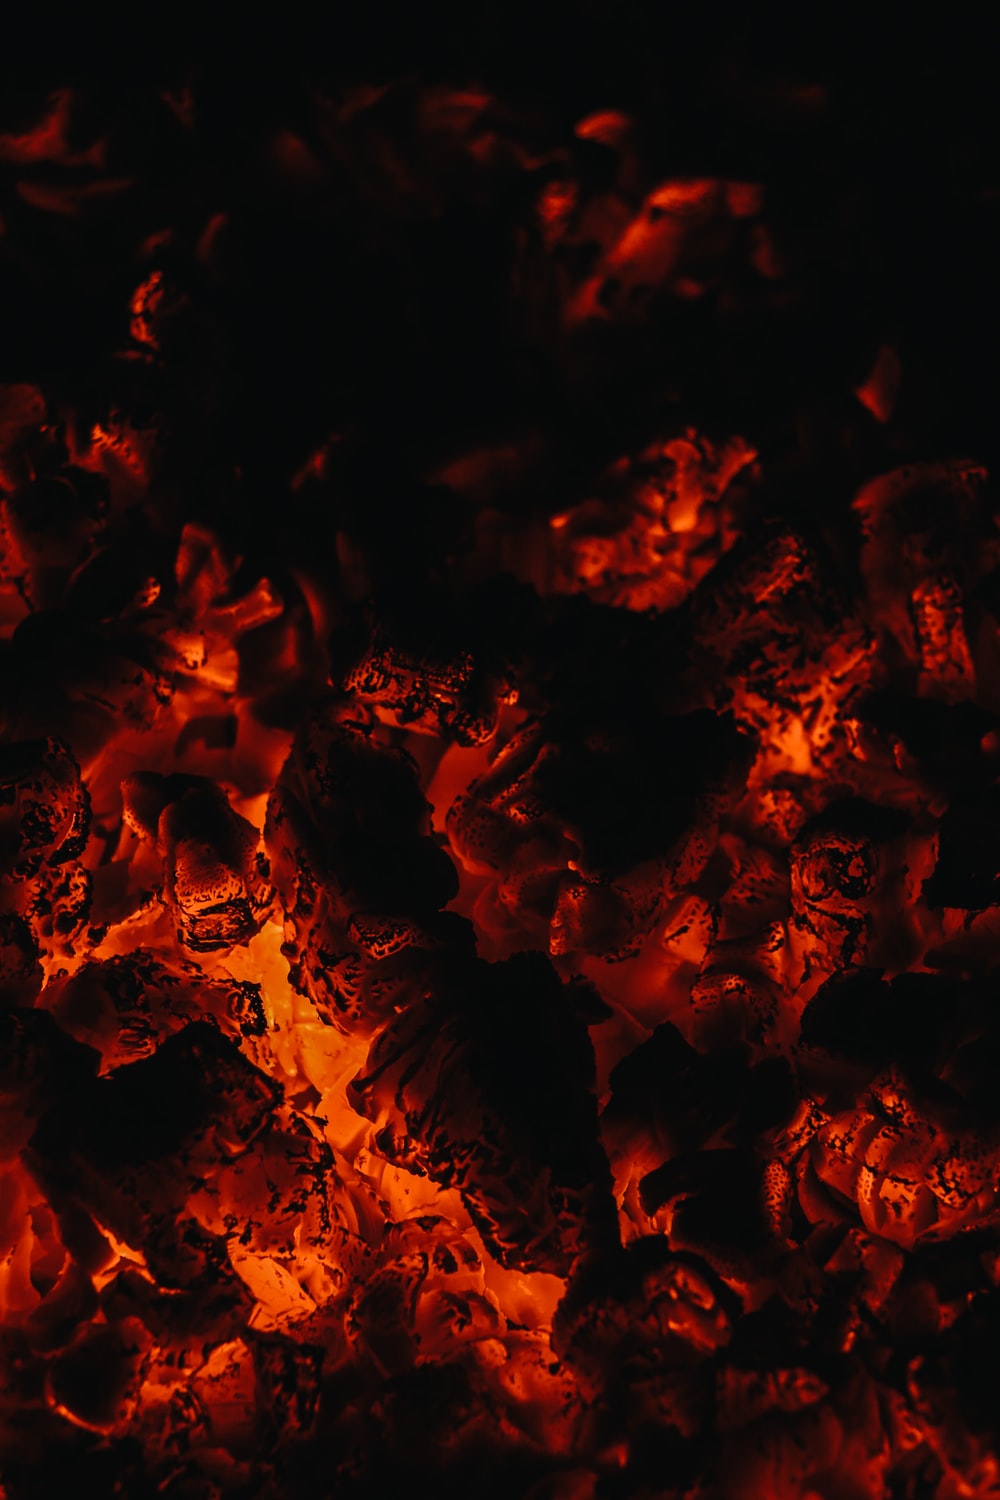 Fire Texture Picture. Download Free Image